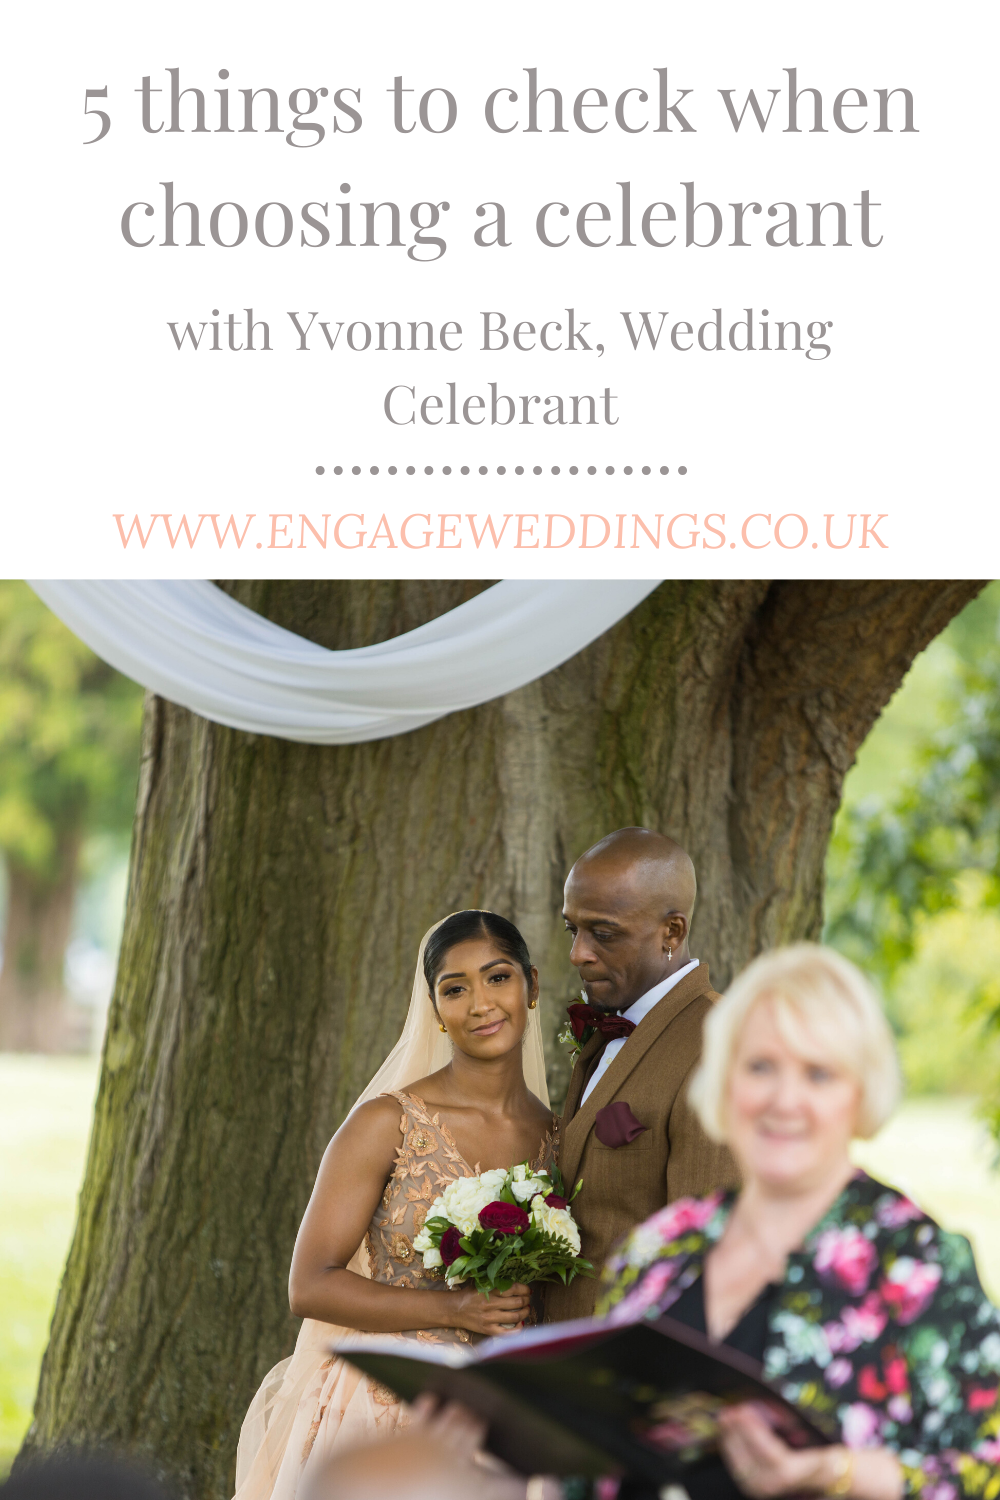 5 things to check when choosing a celebrant_engageweddings.co.uk